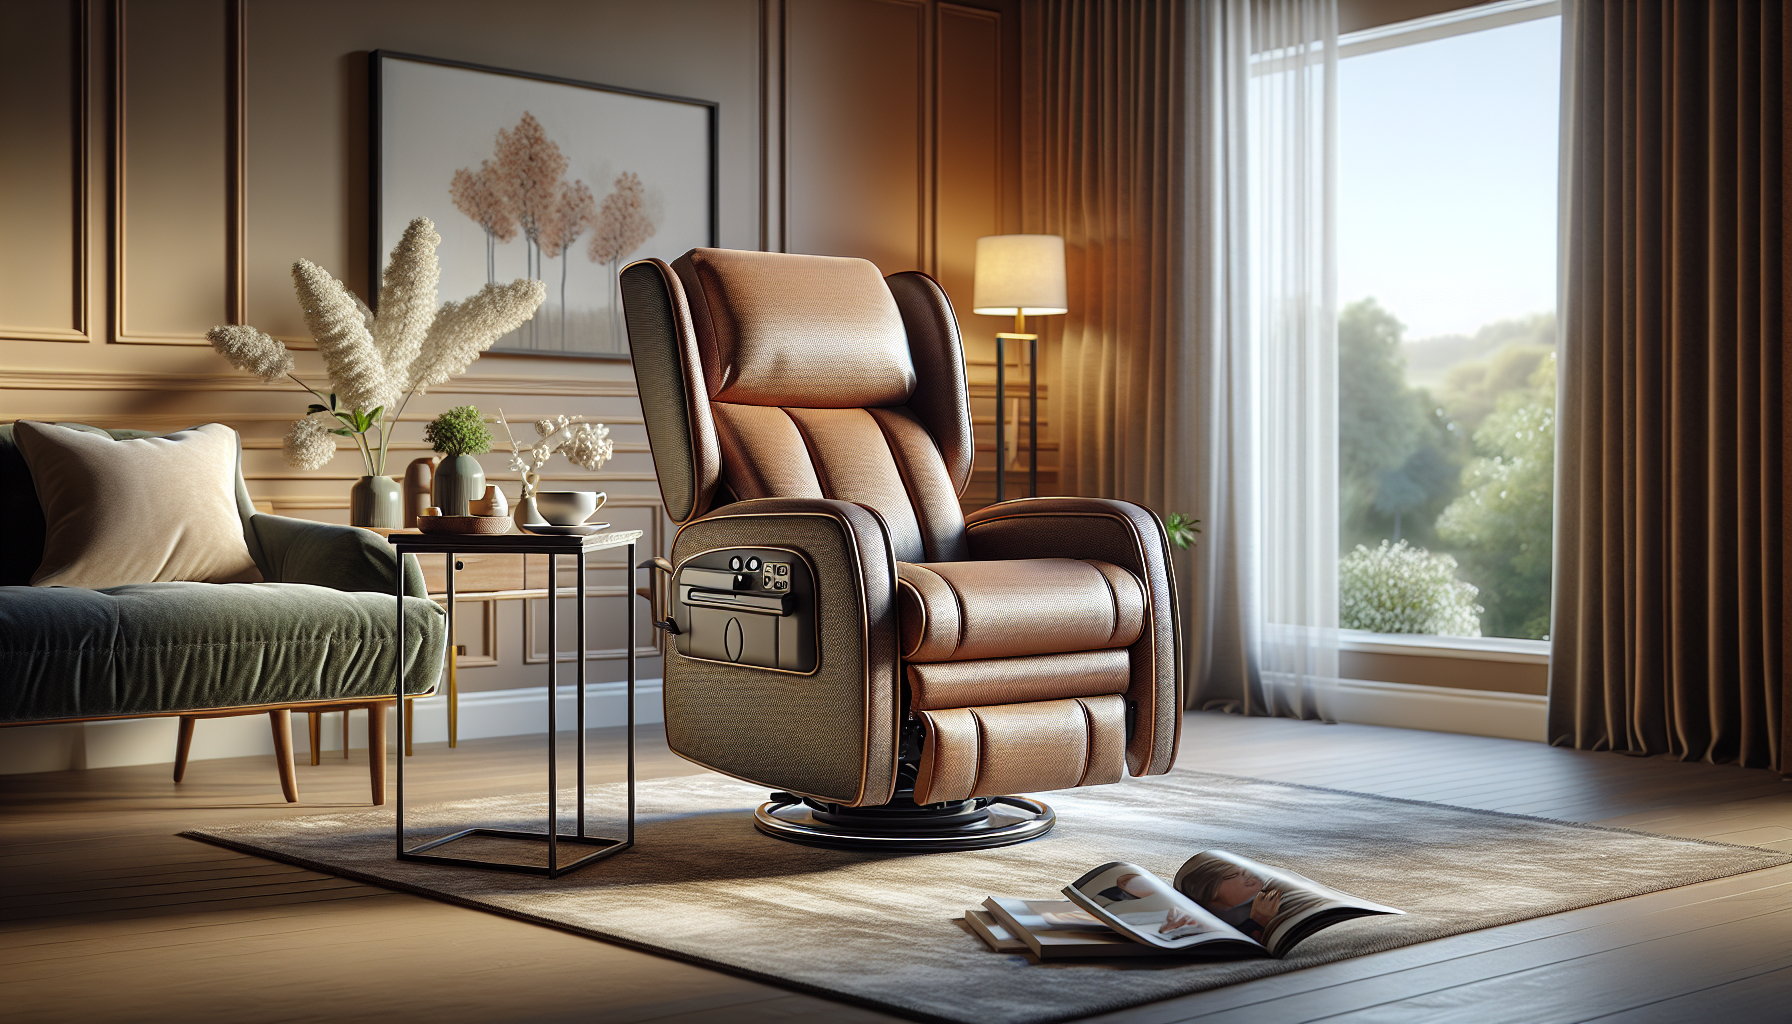 Elevating Comfort: The Best Power Lift Recliner Chairs for Seniors